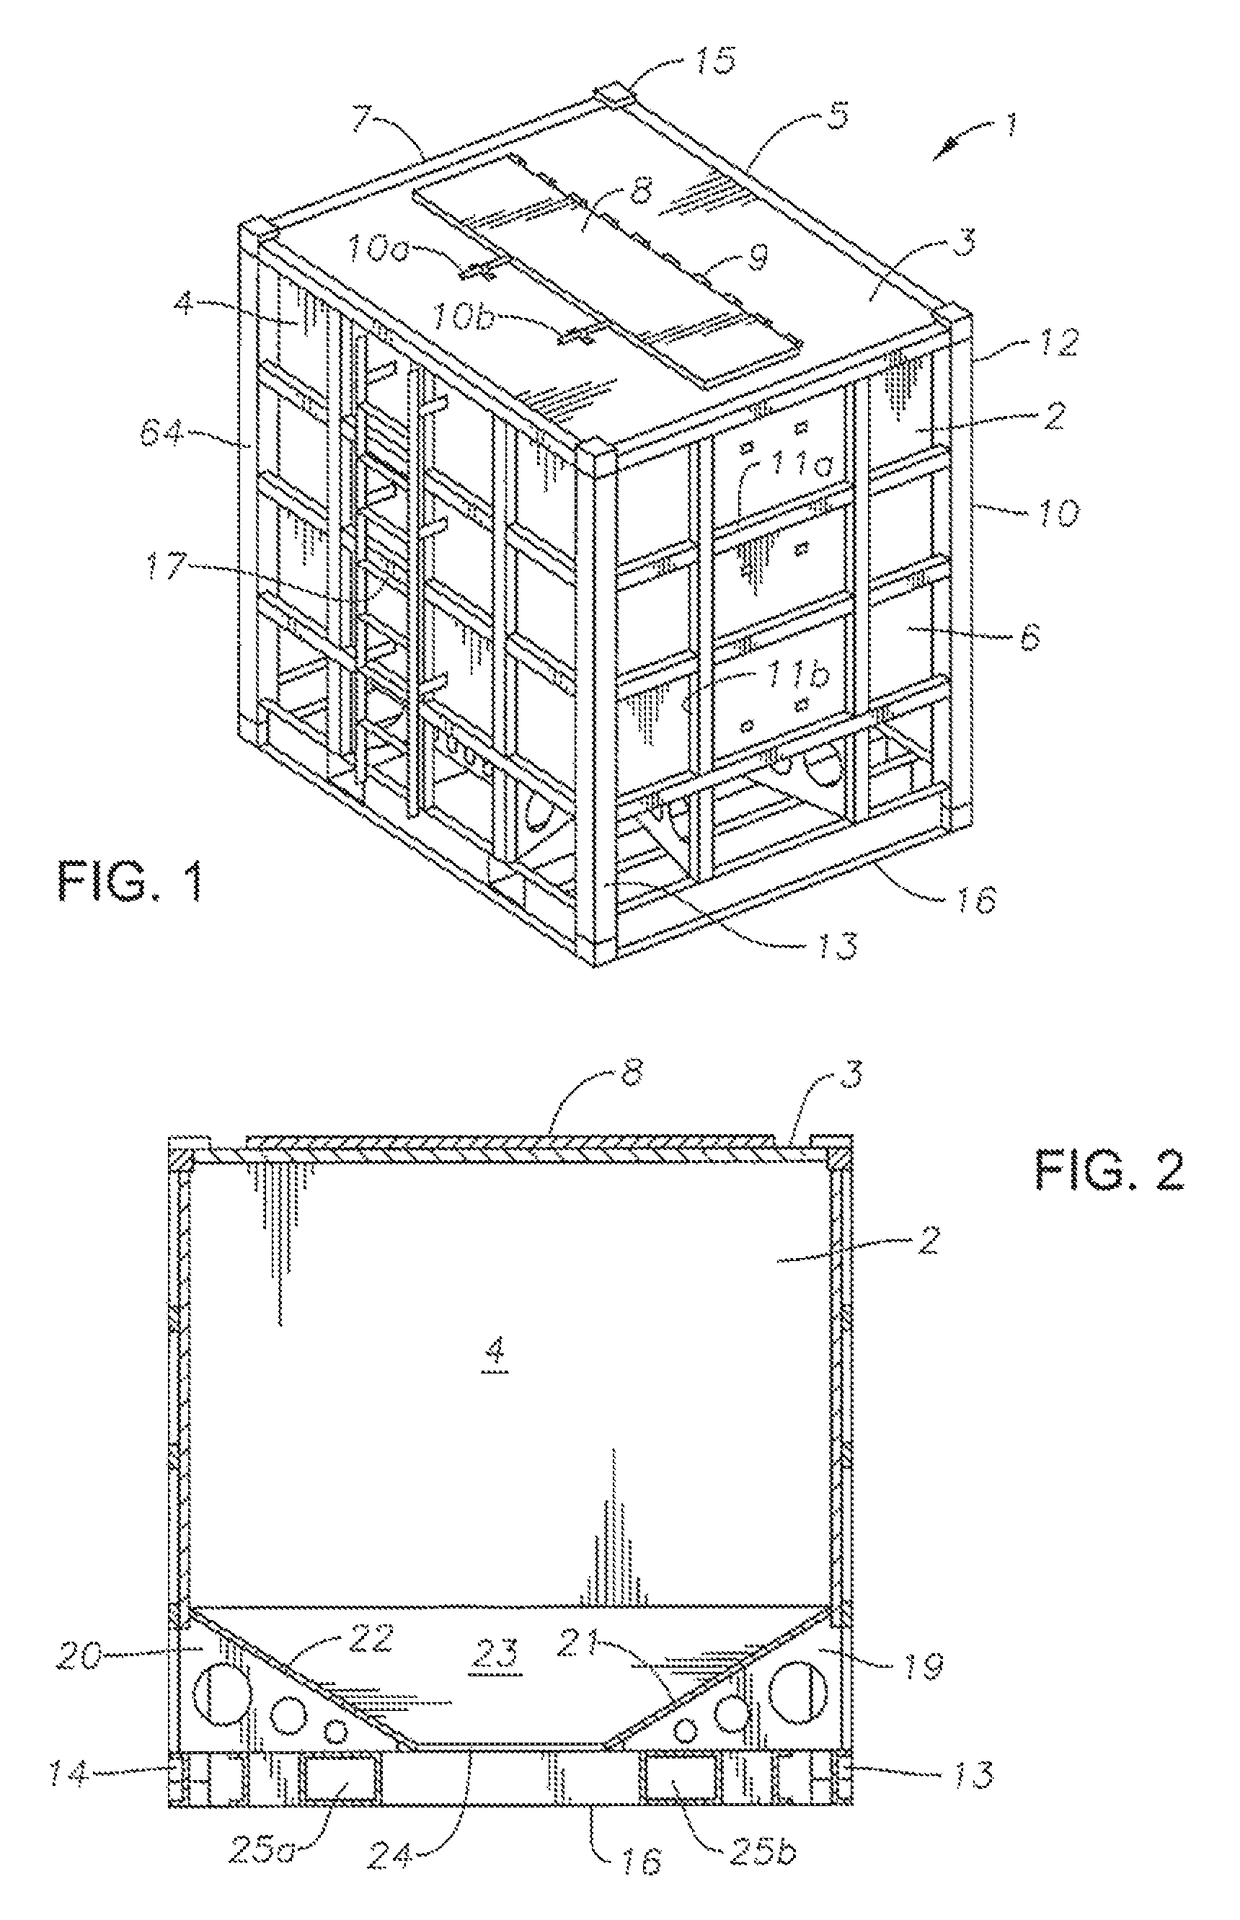 Apparatus for the transport and storage of proppant